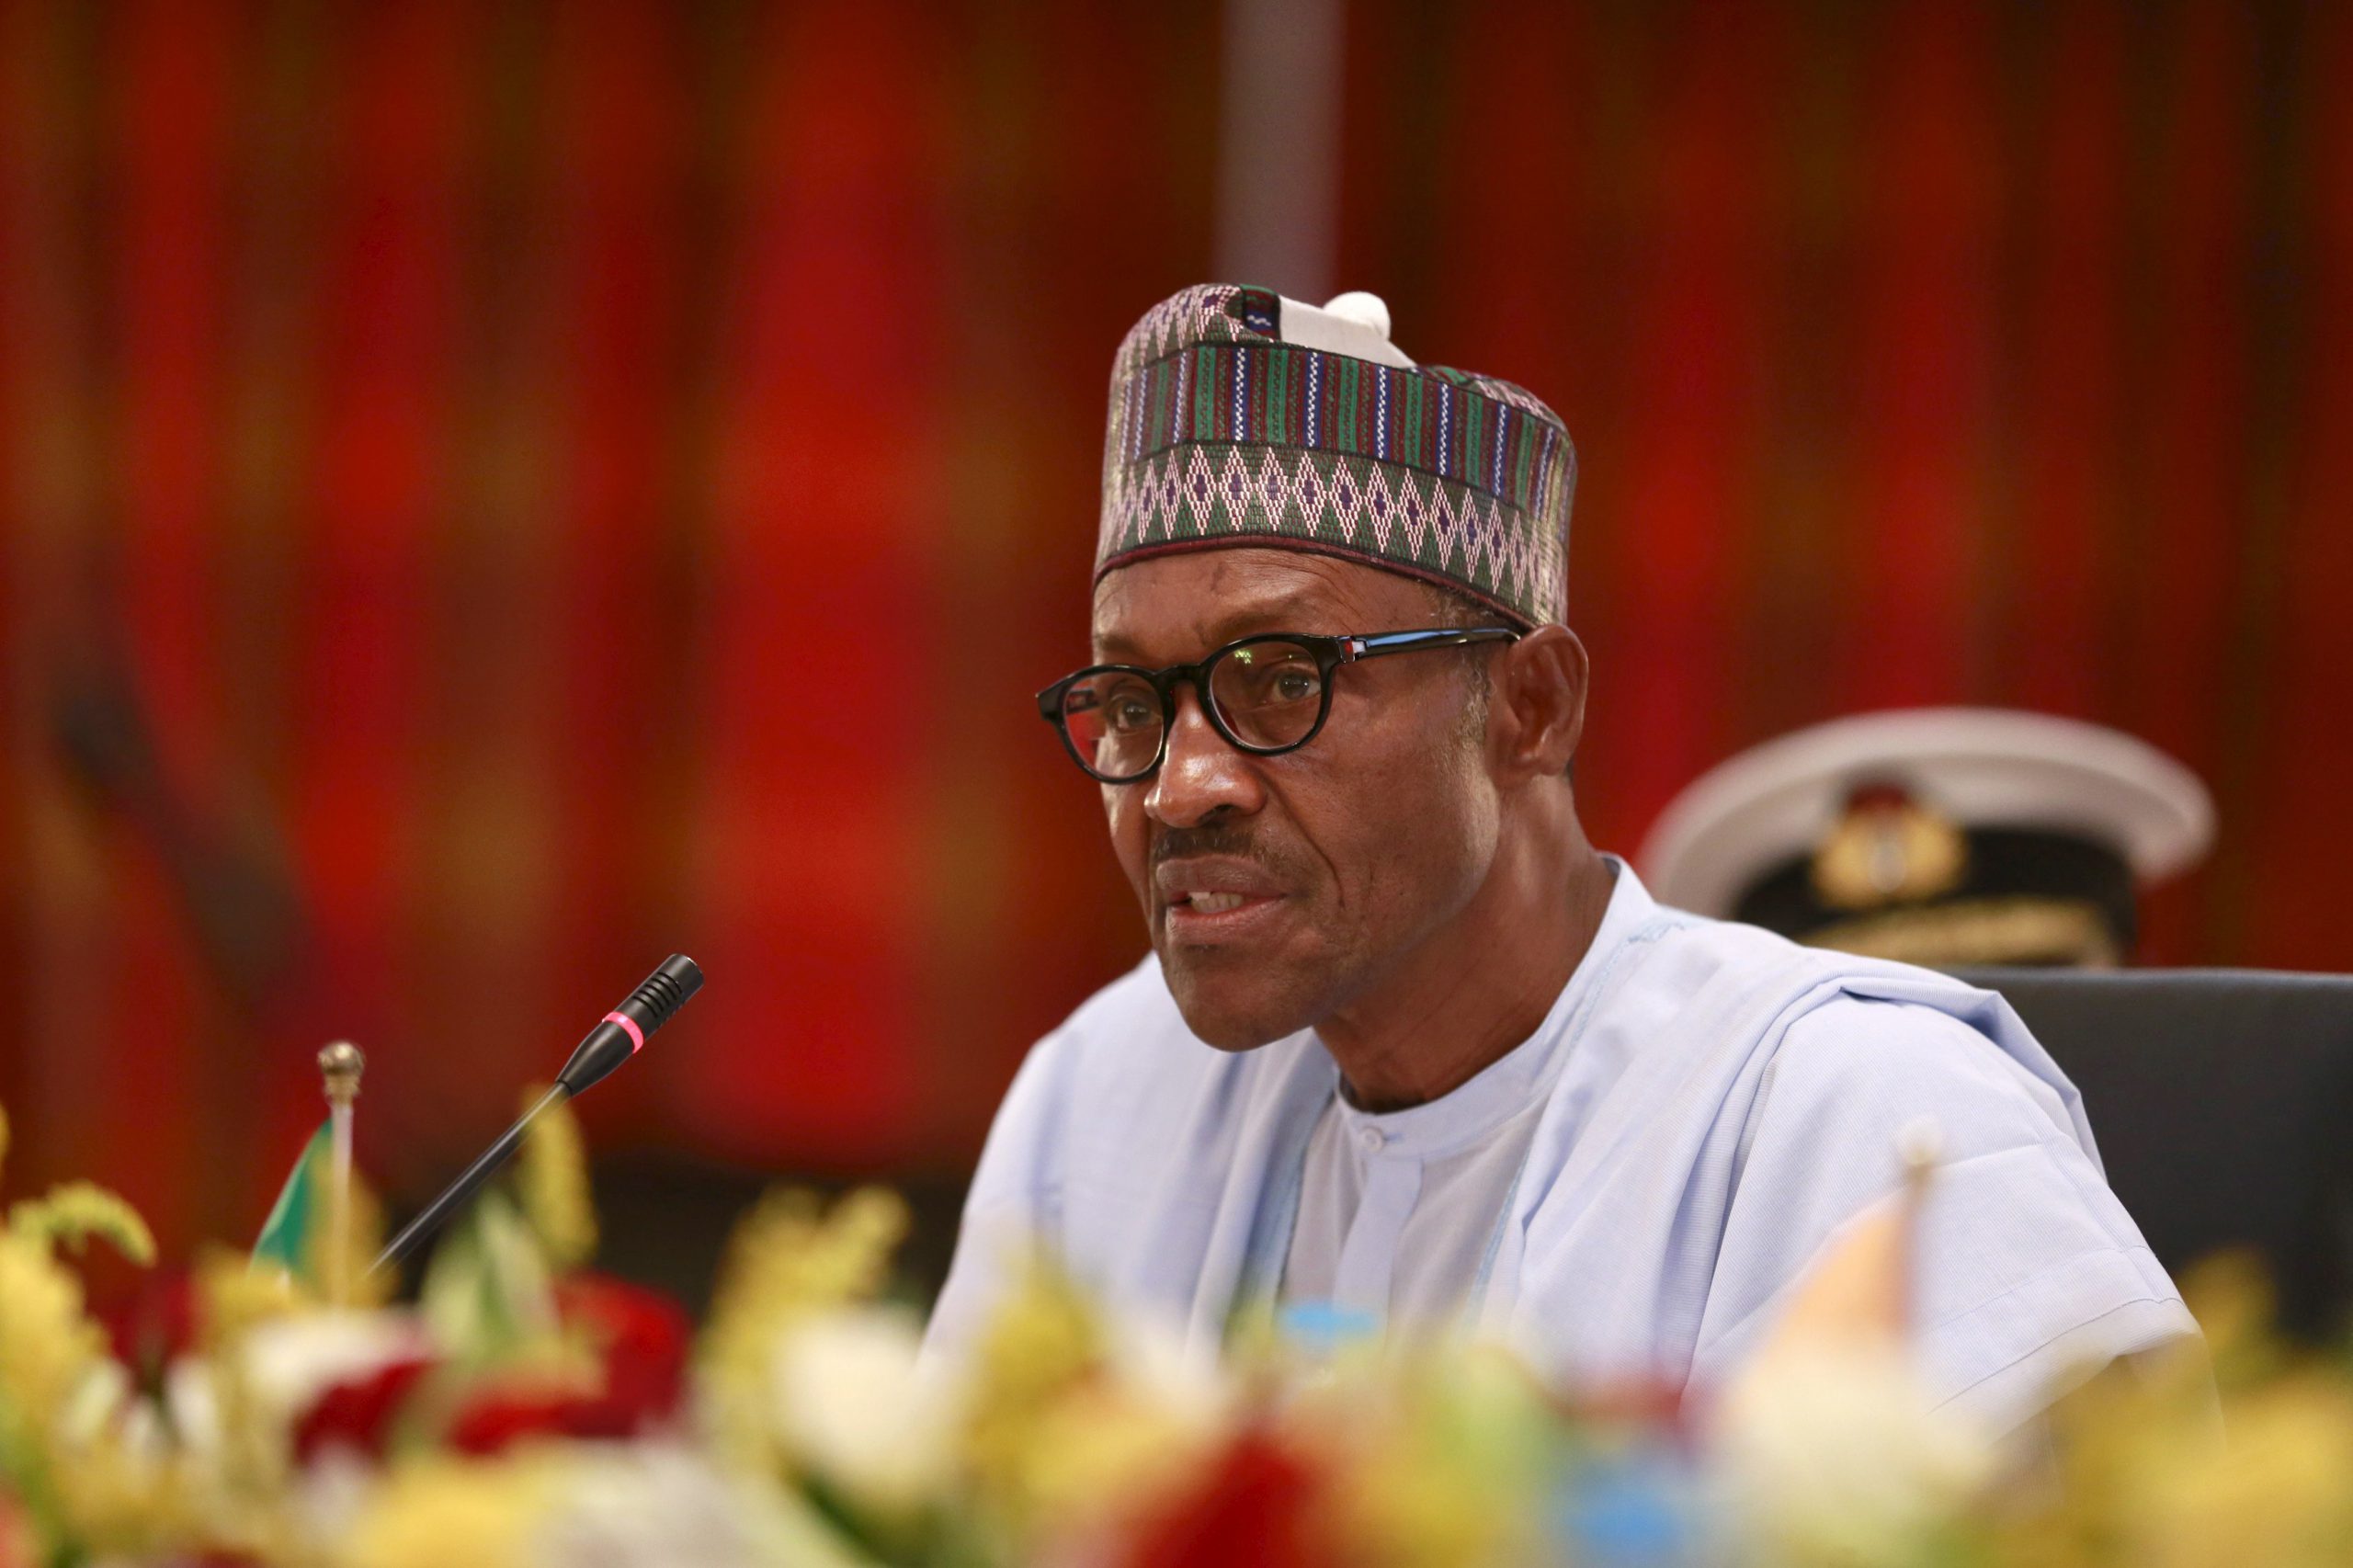 BUHARI REACTS TO ALLEGED SACK OF OSINBAJO’s AIDES